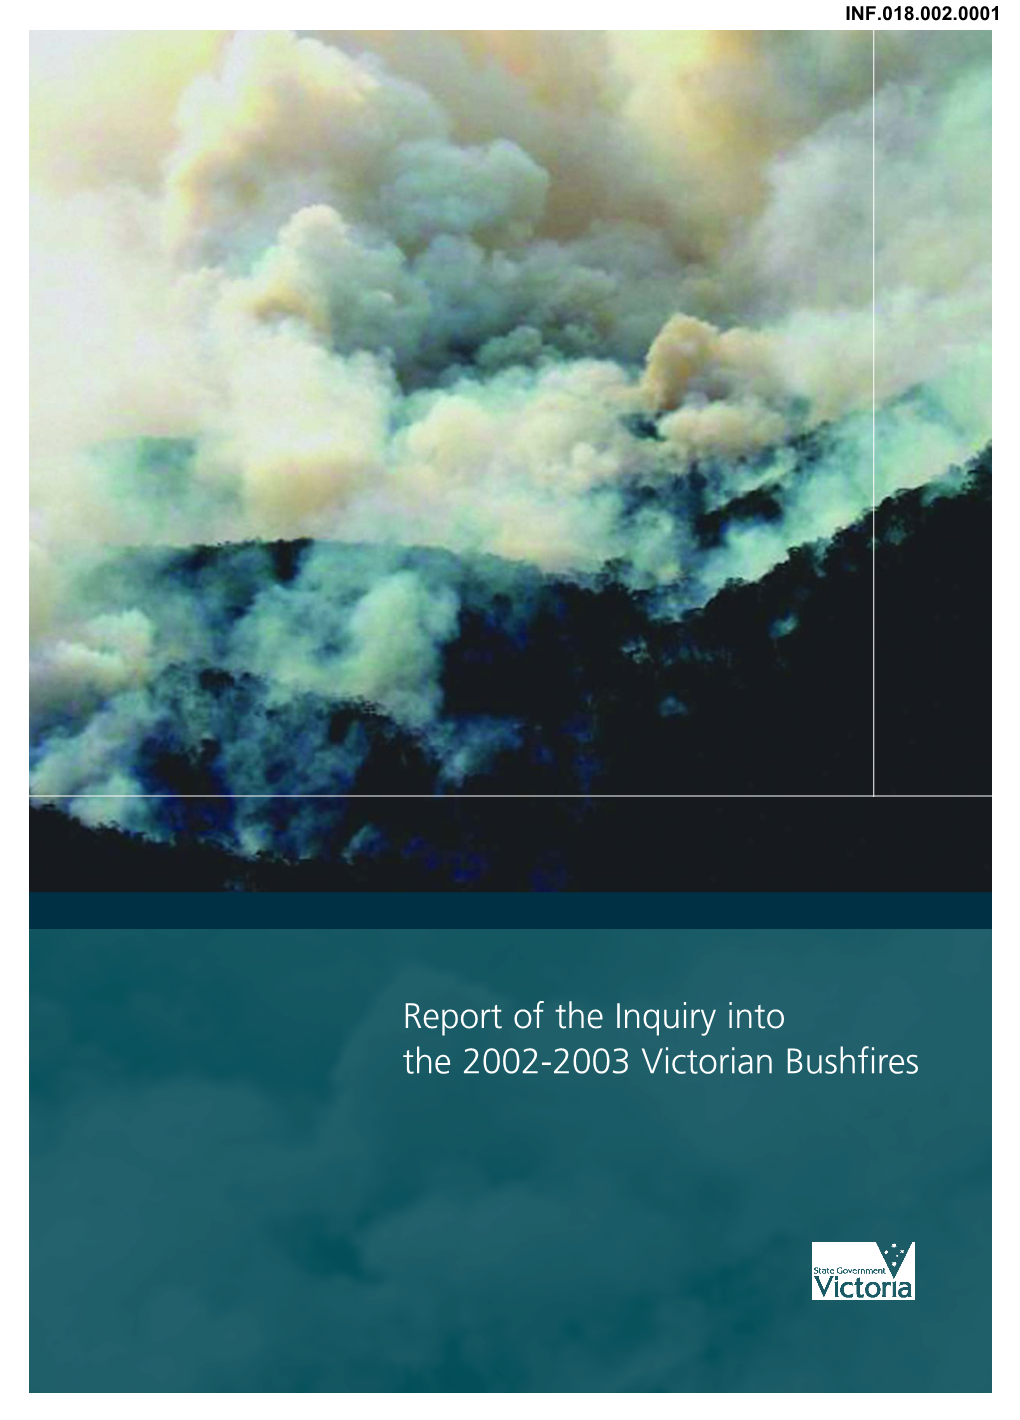 Report of the Inquiry Into the 2002-2003 Victorian Bushfires INF.018.002.0002